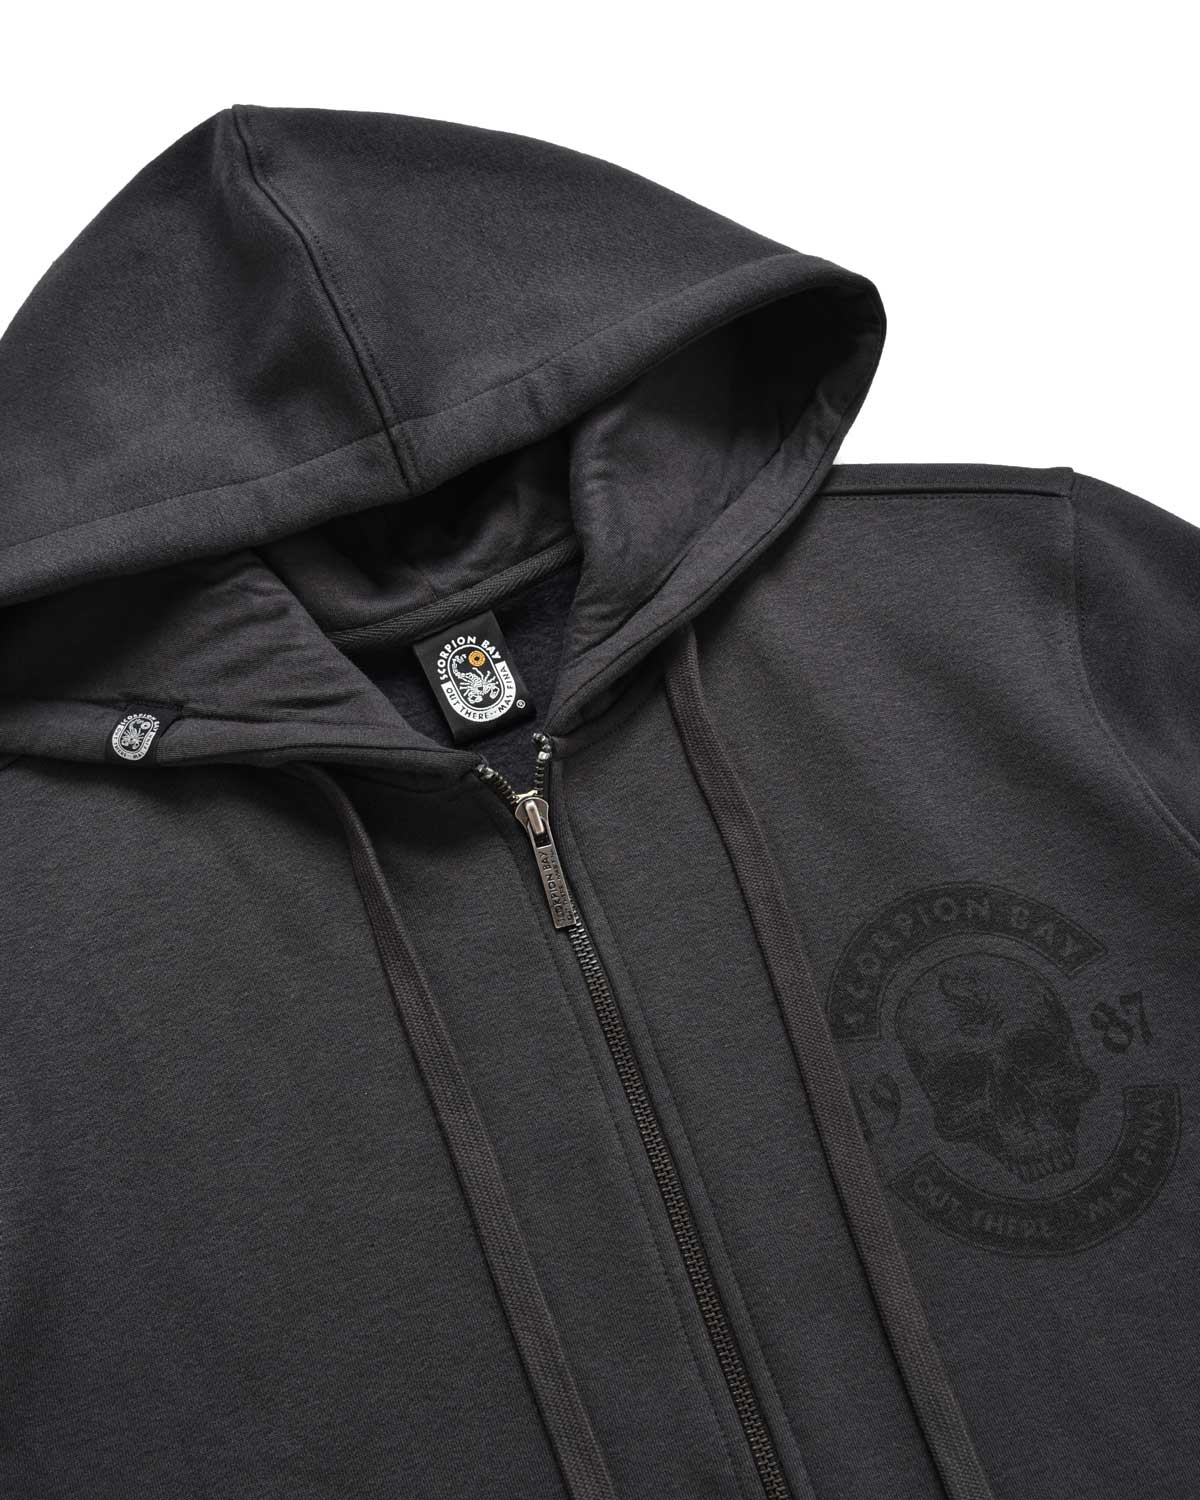 Man | Charcoal Zip Up Hoodie And “Skull 1987" Patch